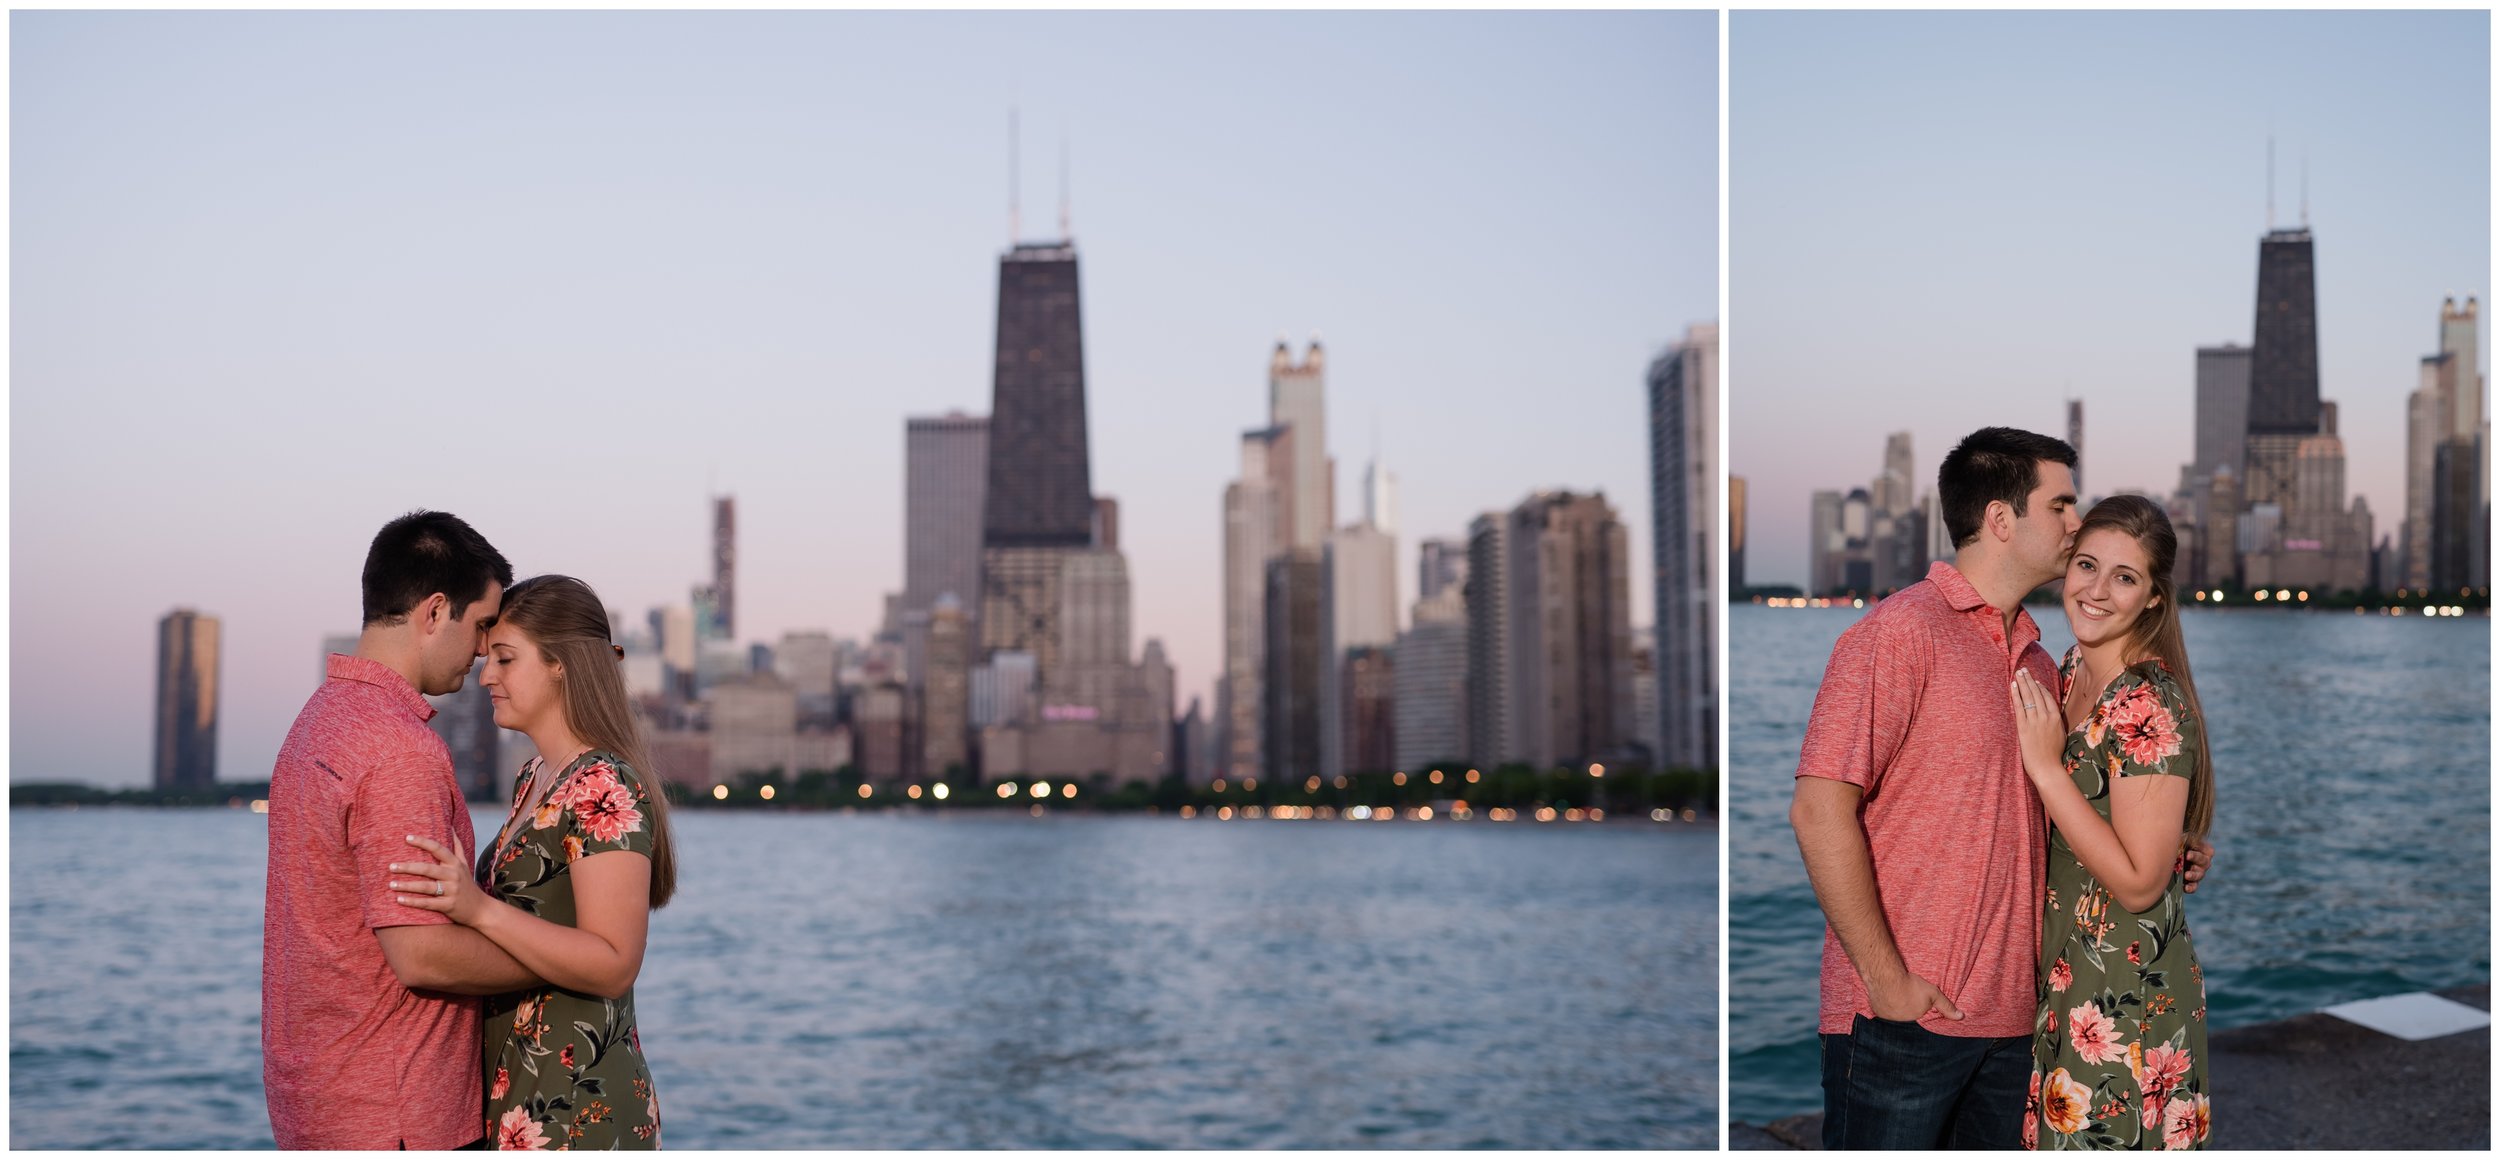 North ave. Beach Chicago Engagement Photos